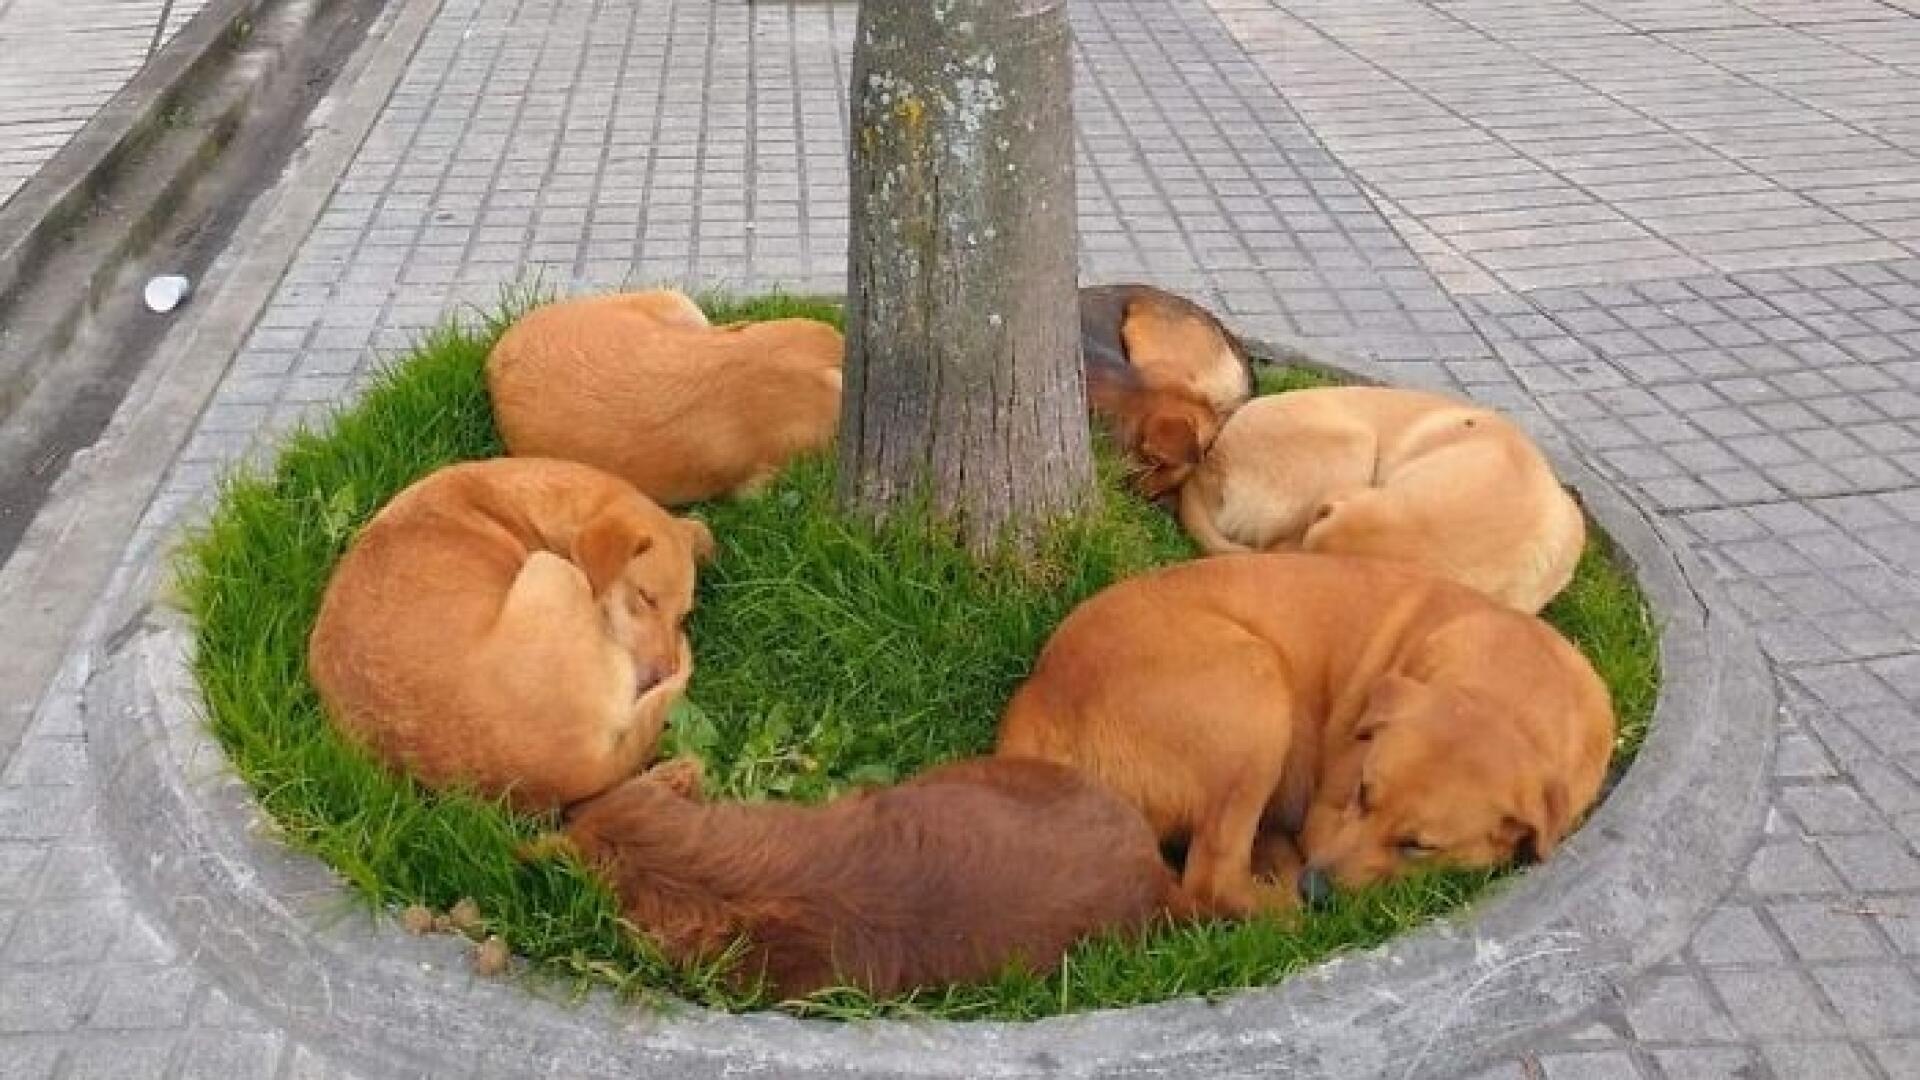 /5.Homeless dogs take shelter under roadside trees, forming a circle while sleeping next to each other, showing warmth that makes passersby feel sad. ‎ ‎